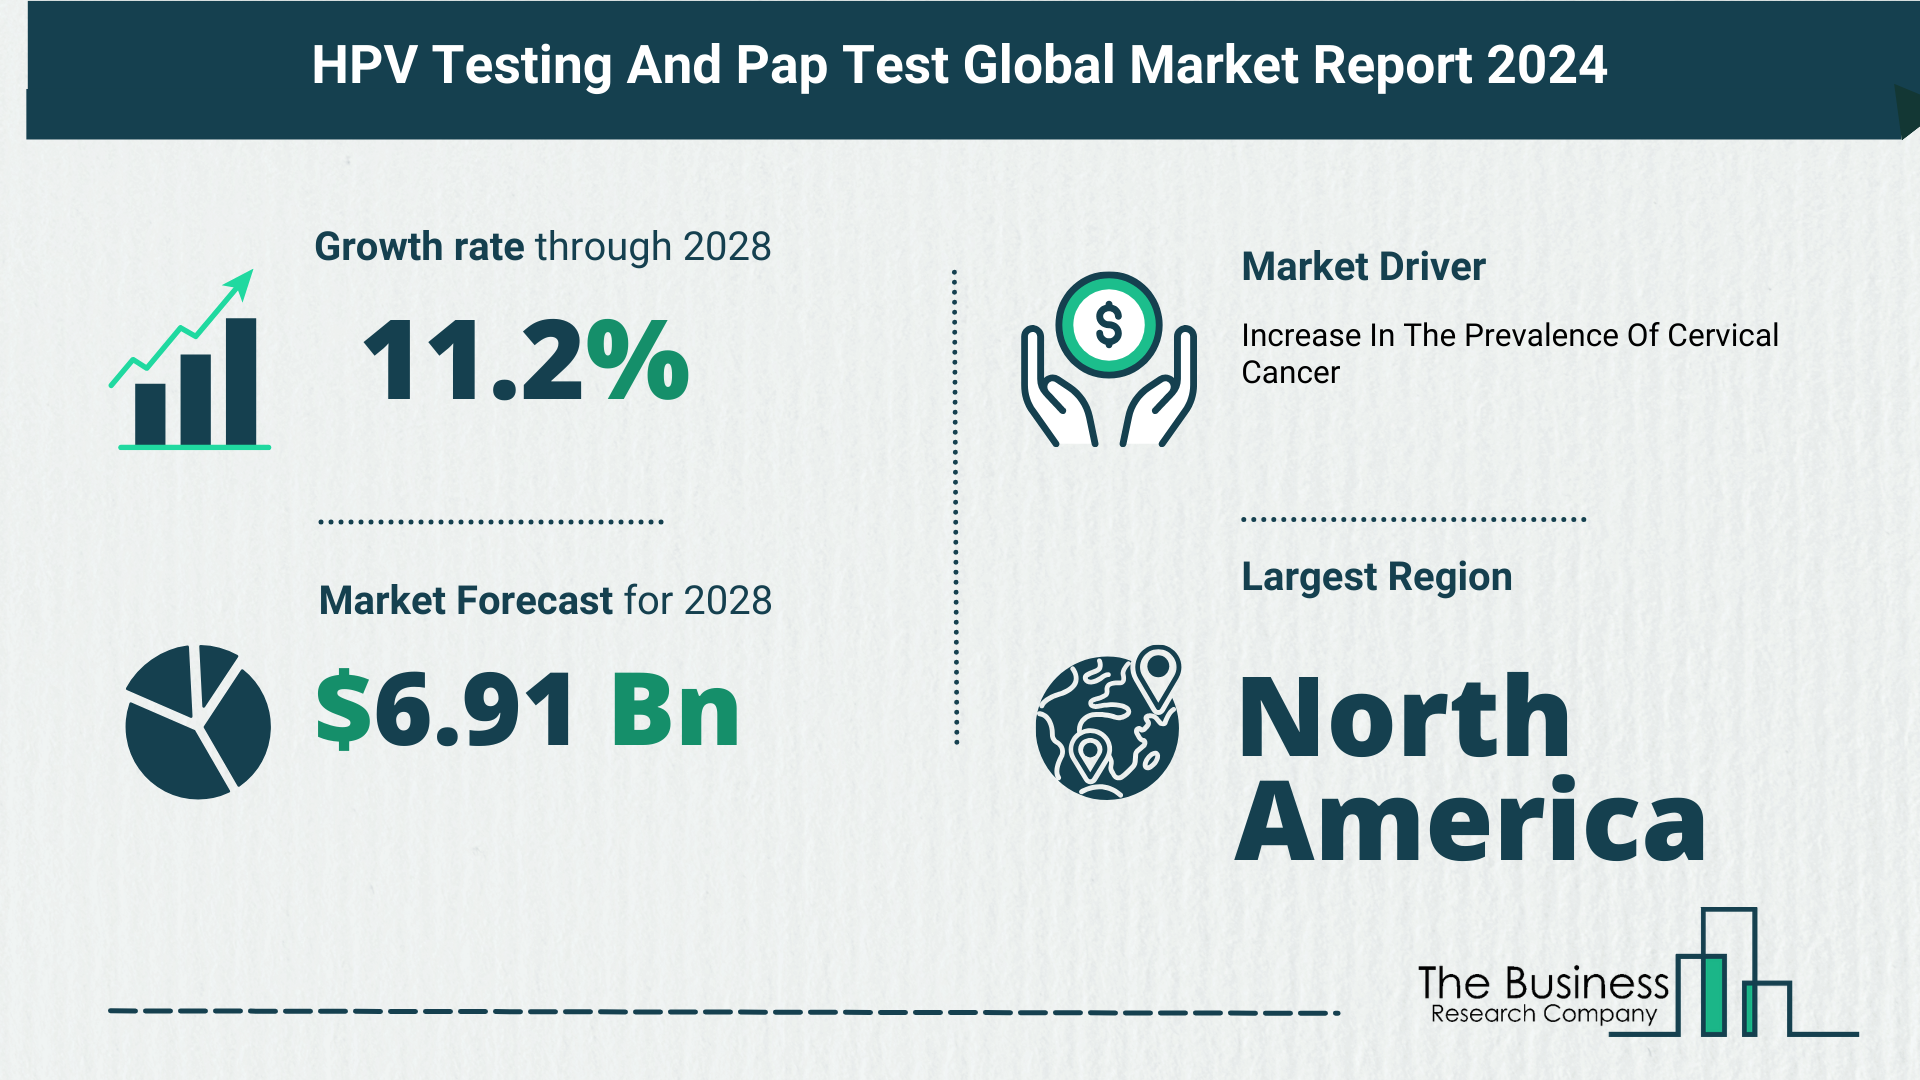 Global HPV Testing And Pap Test Market